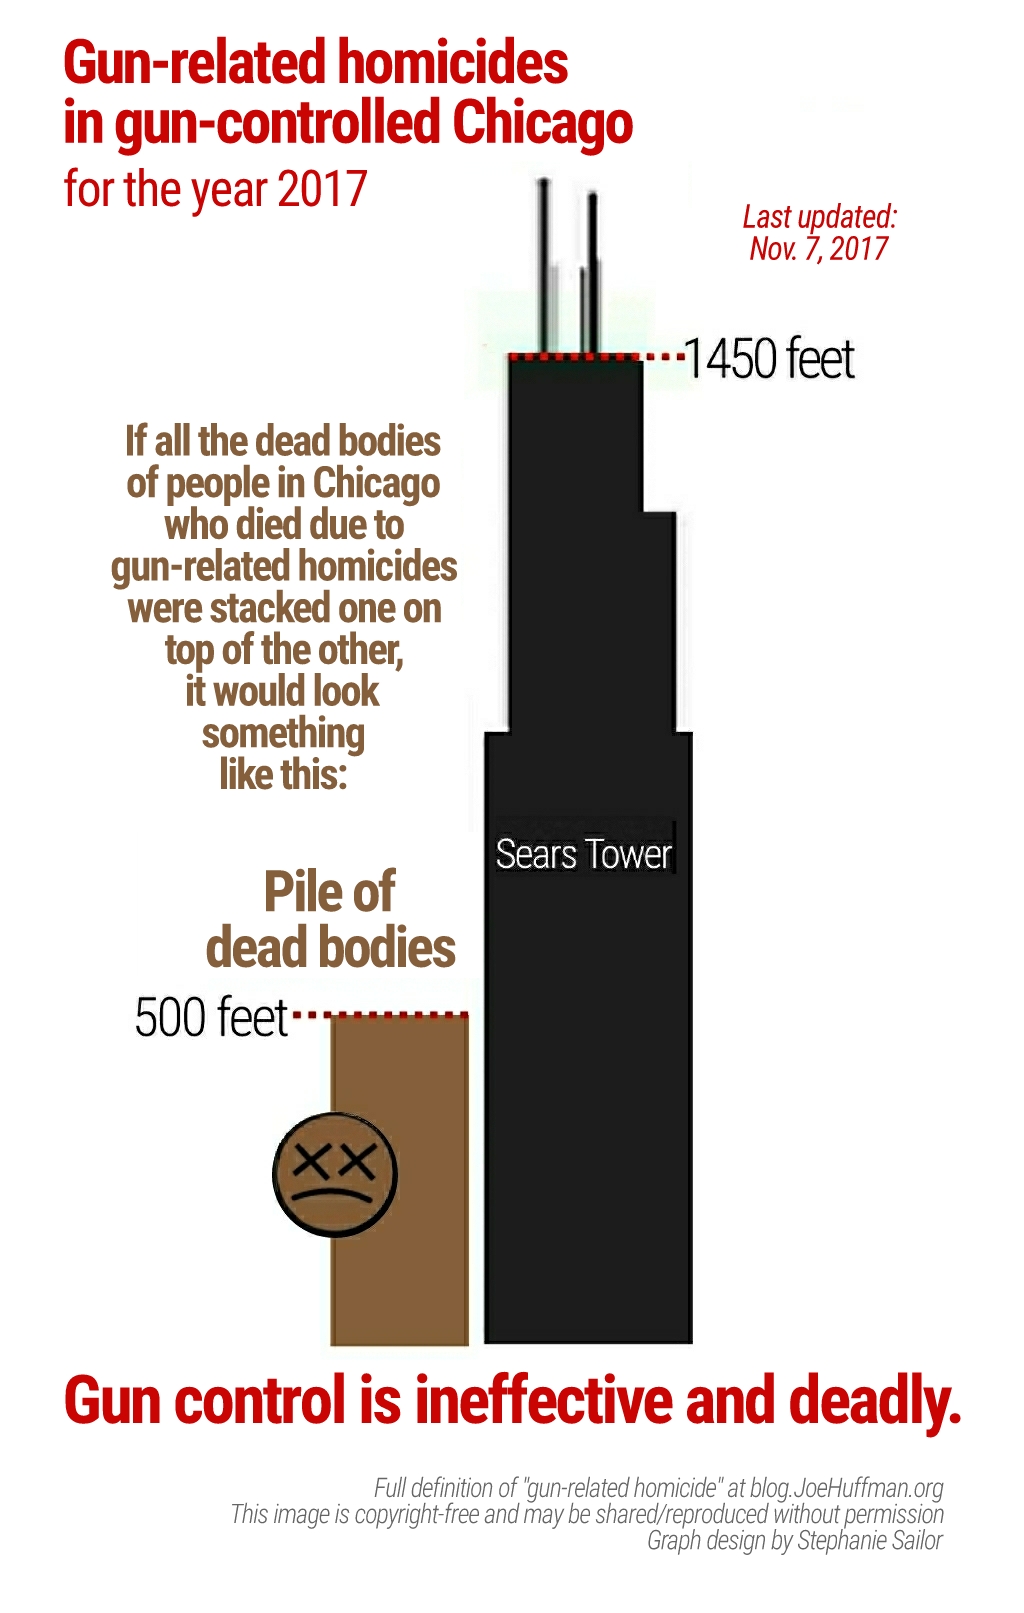 If you were to stack bodies of people who died in gun-related homicides in Chicago 2017, it would be nearly 500-feet tall